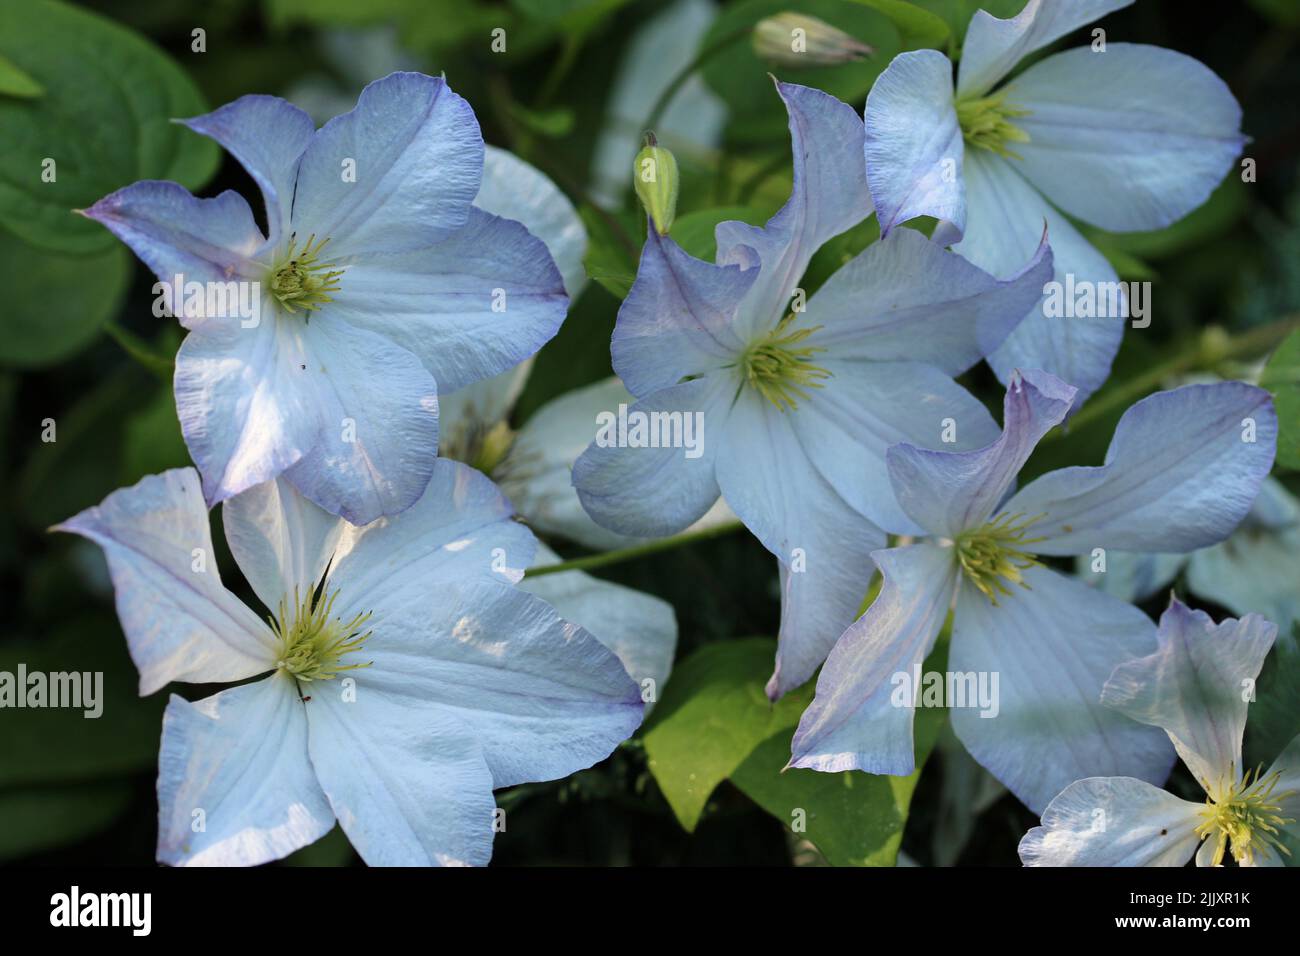 Blue early large flowered Clematis, variety Fujimusume, flowers in close up with a background of blurred leaves. Stock Photo